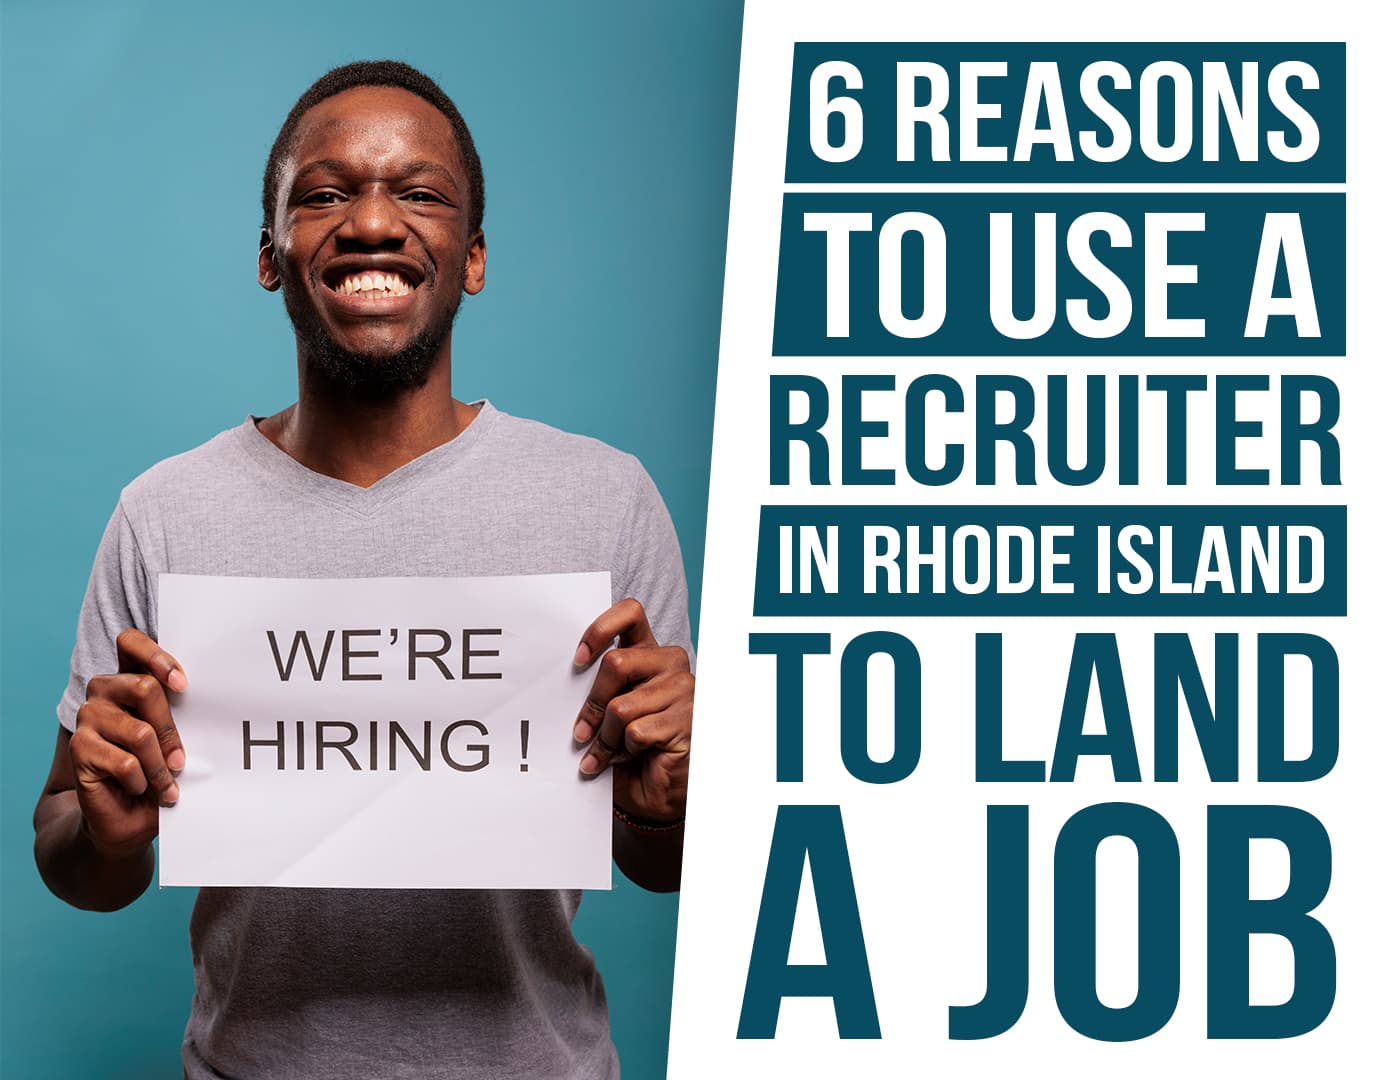 6 Reasons to use a recruiter in rhode island to land a job